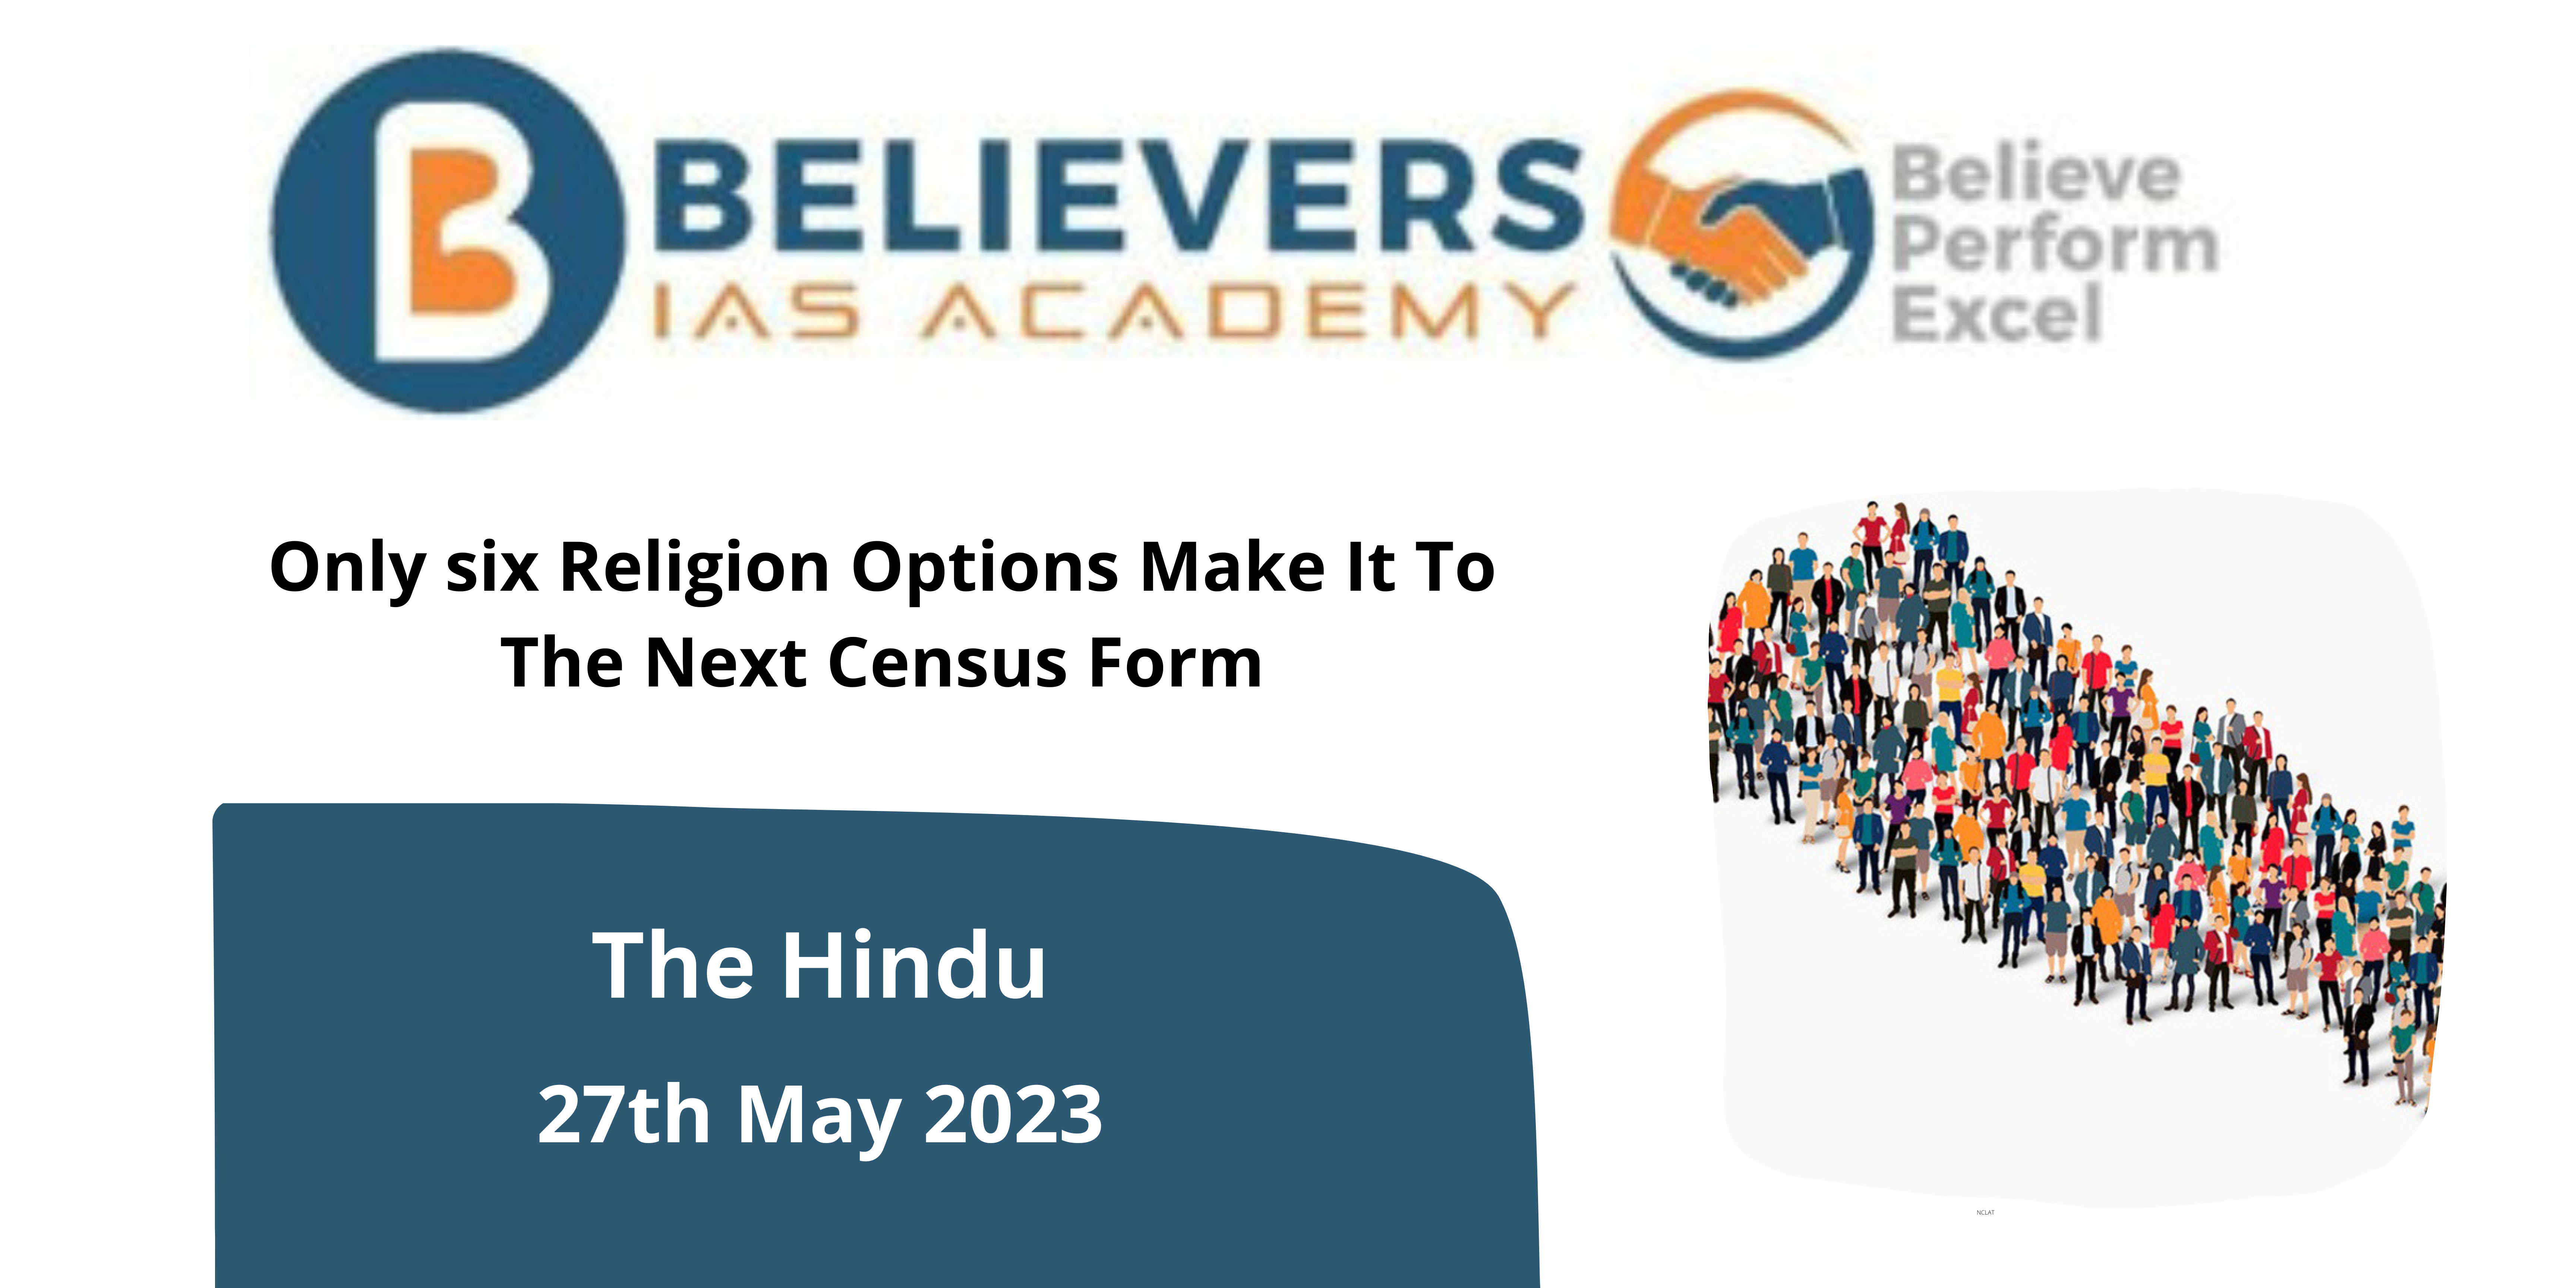 Only six Religion Options Make It To The Next Census Form